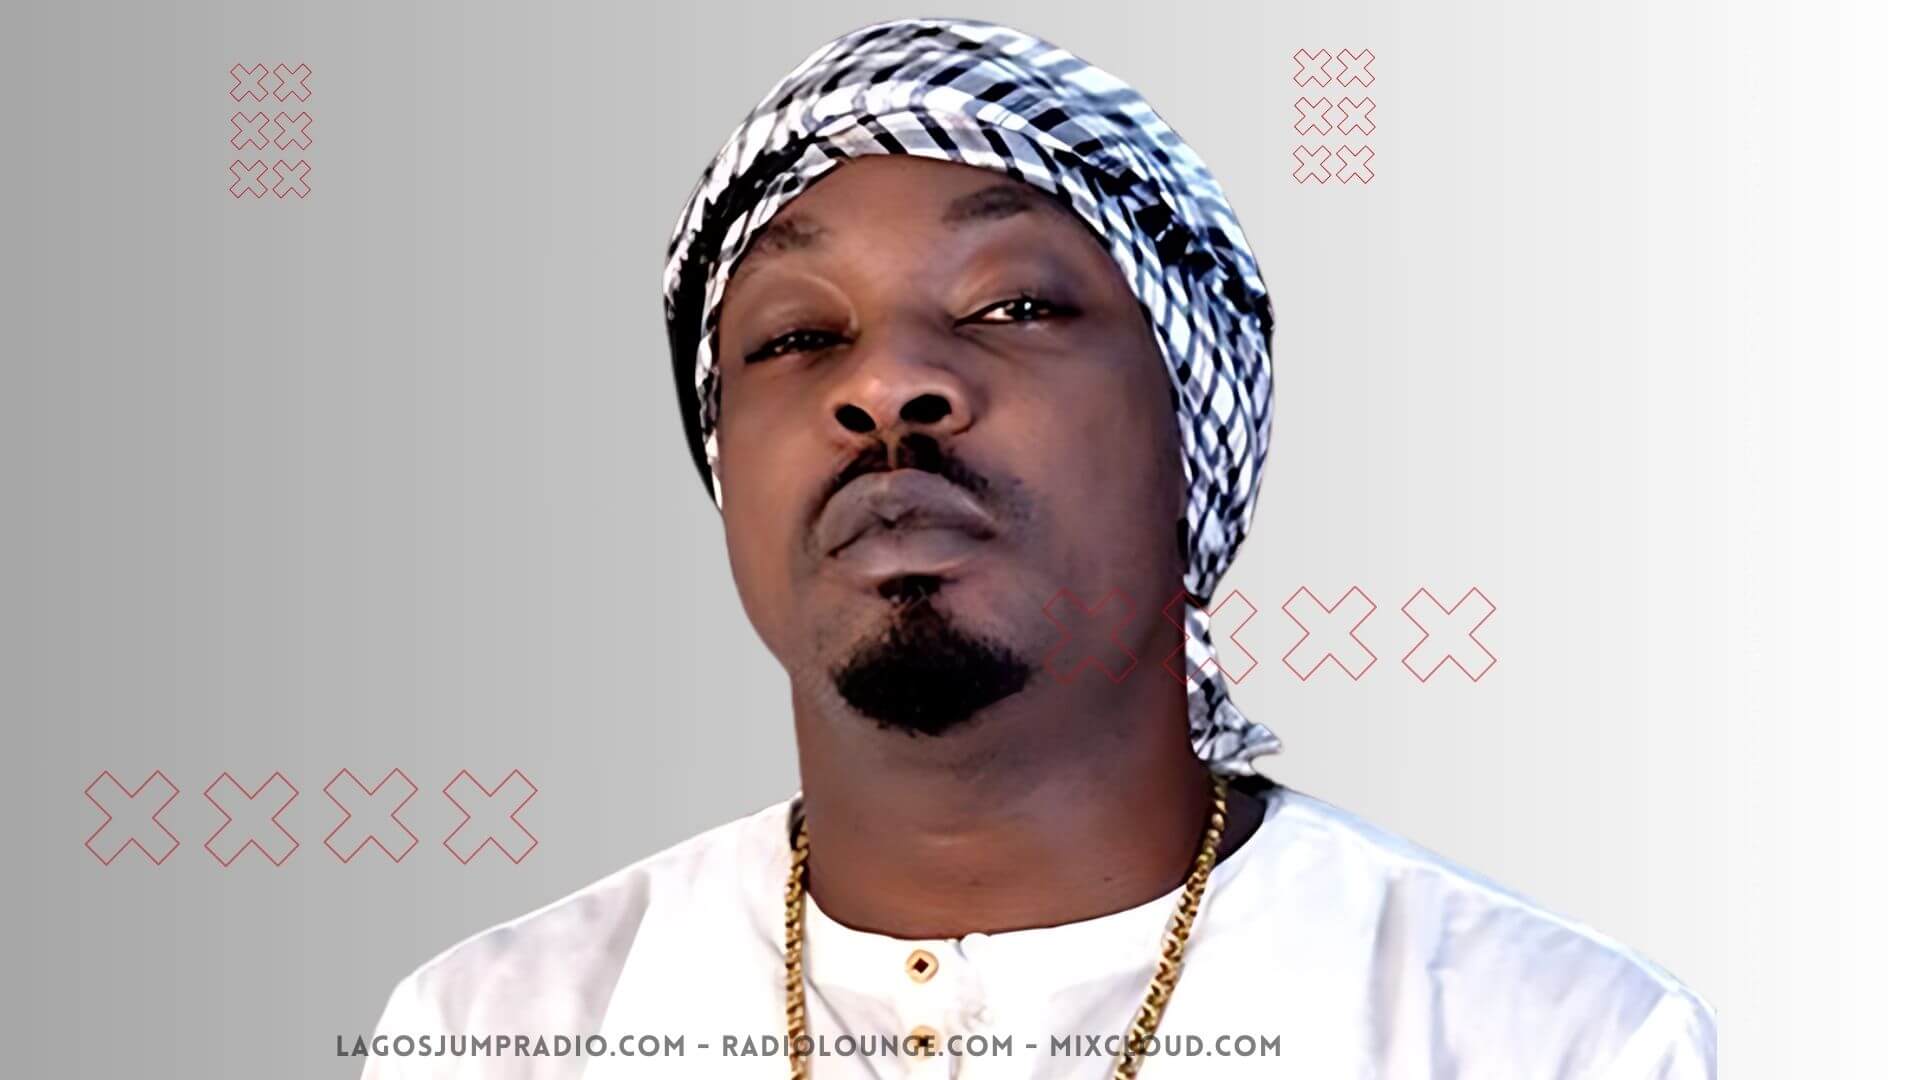 This Throwback Thursday, we take a trip down memory lane to celebrate the legendary Eedris Abdulkareem (@abdulkareemeedris)! A true pioneer of Nigerian music, Eedris' legacy continues to inspire and influence generations of artists.